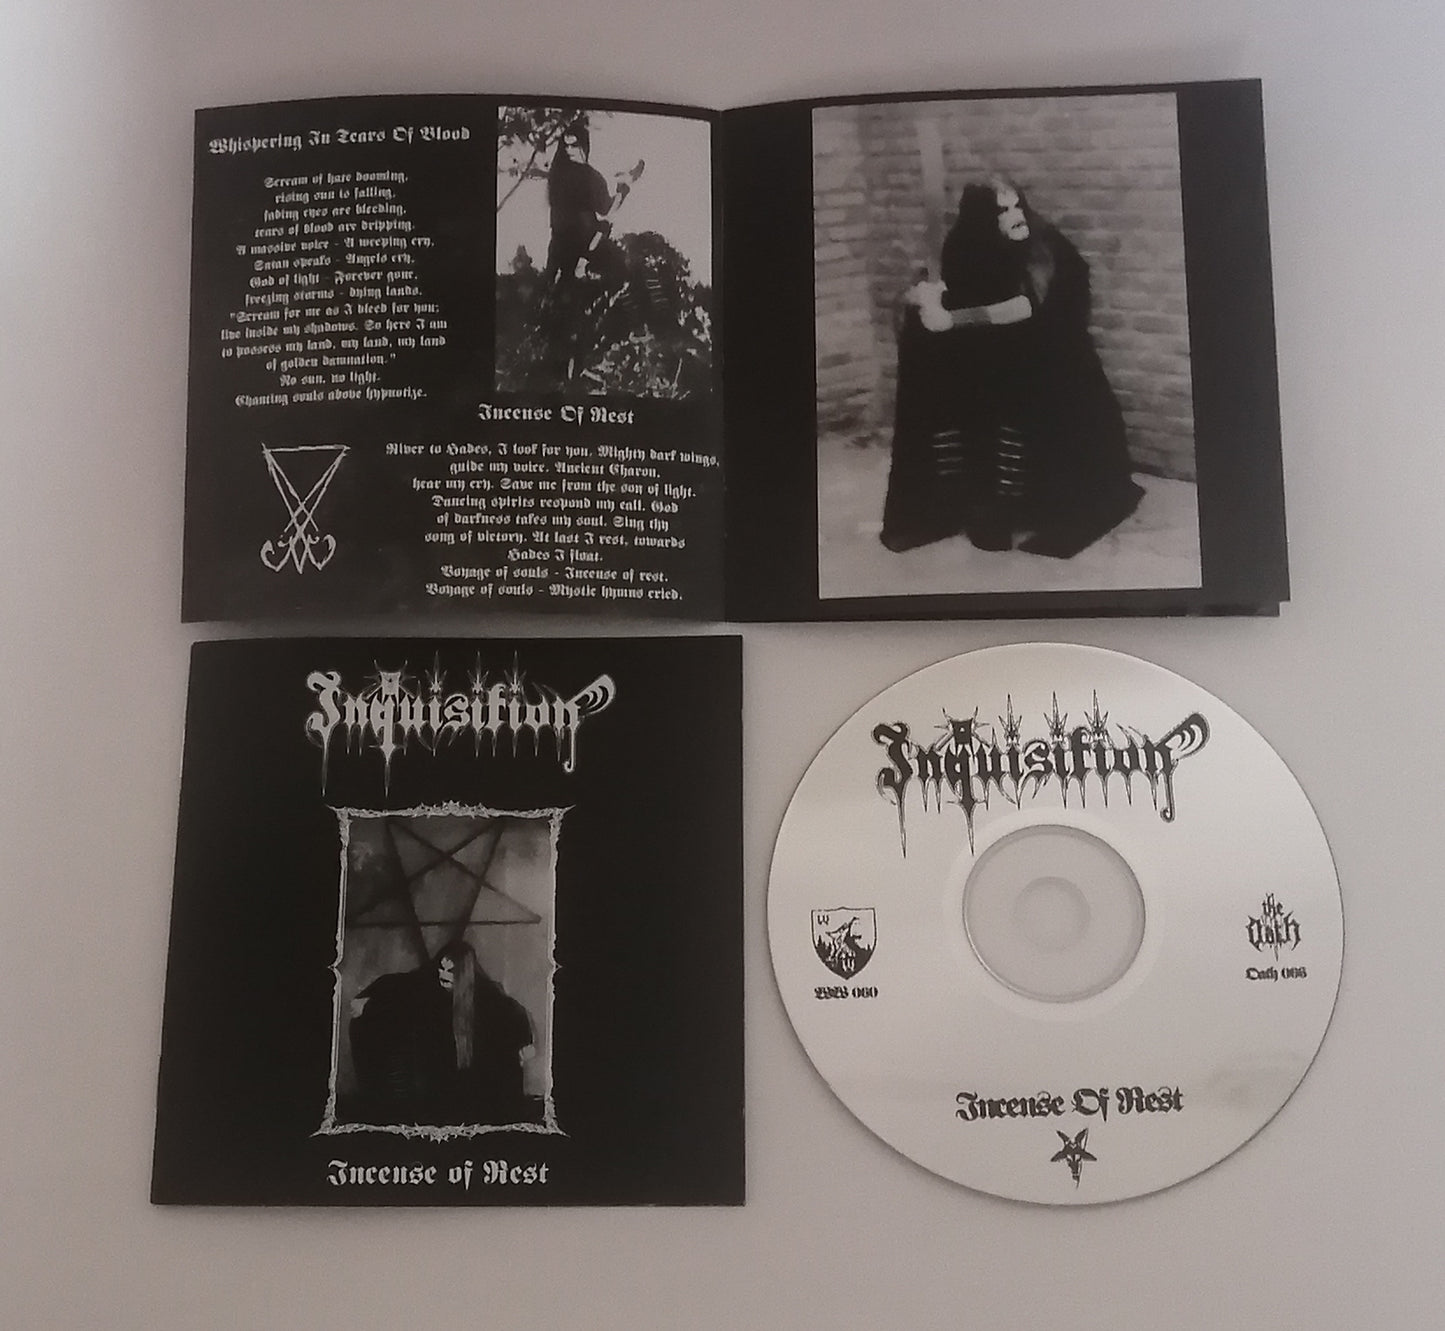 Inquisition (Col) "Incense of Rest" - CDs ***New in Stock***